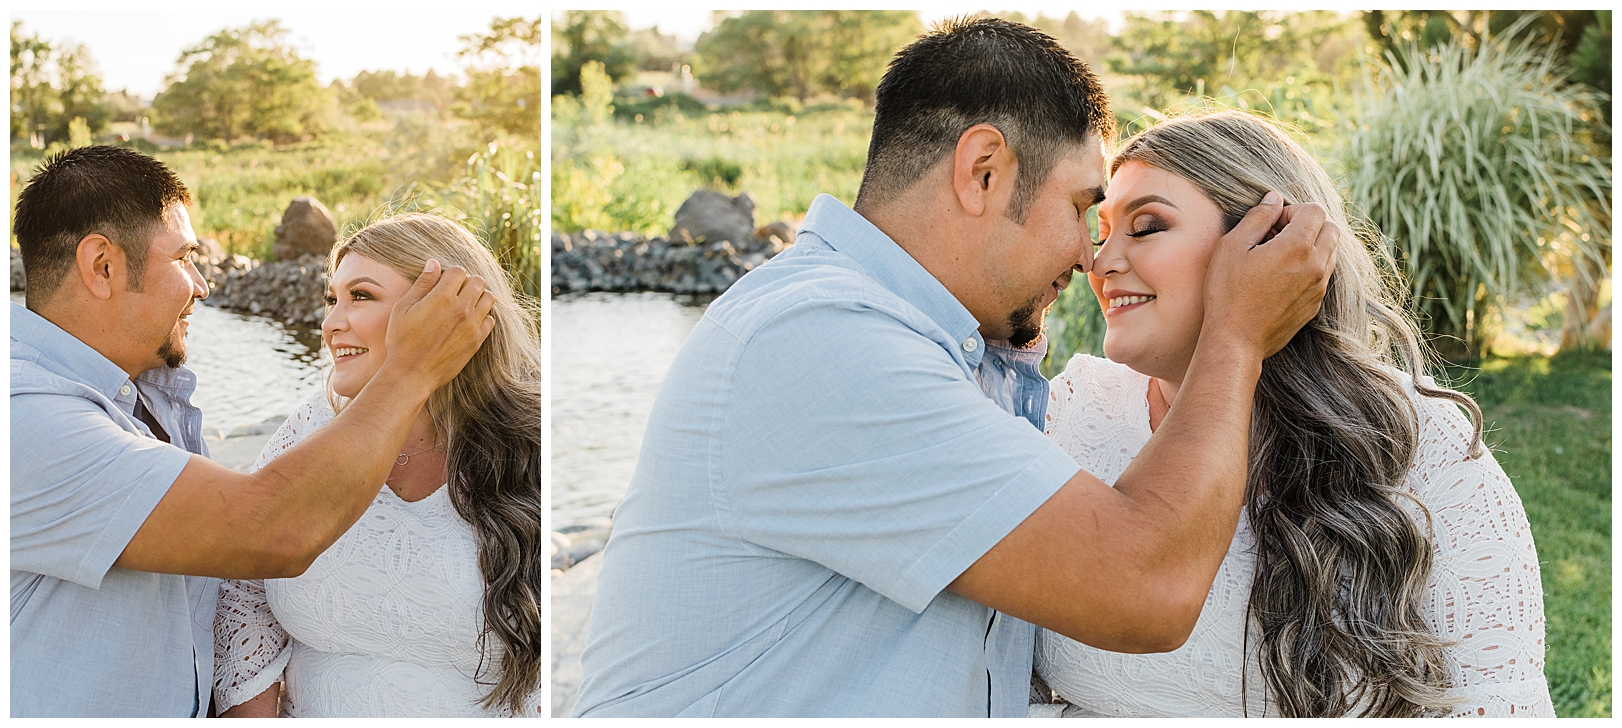 moses lake engagement session locations